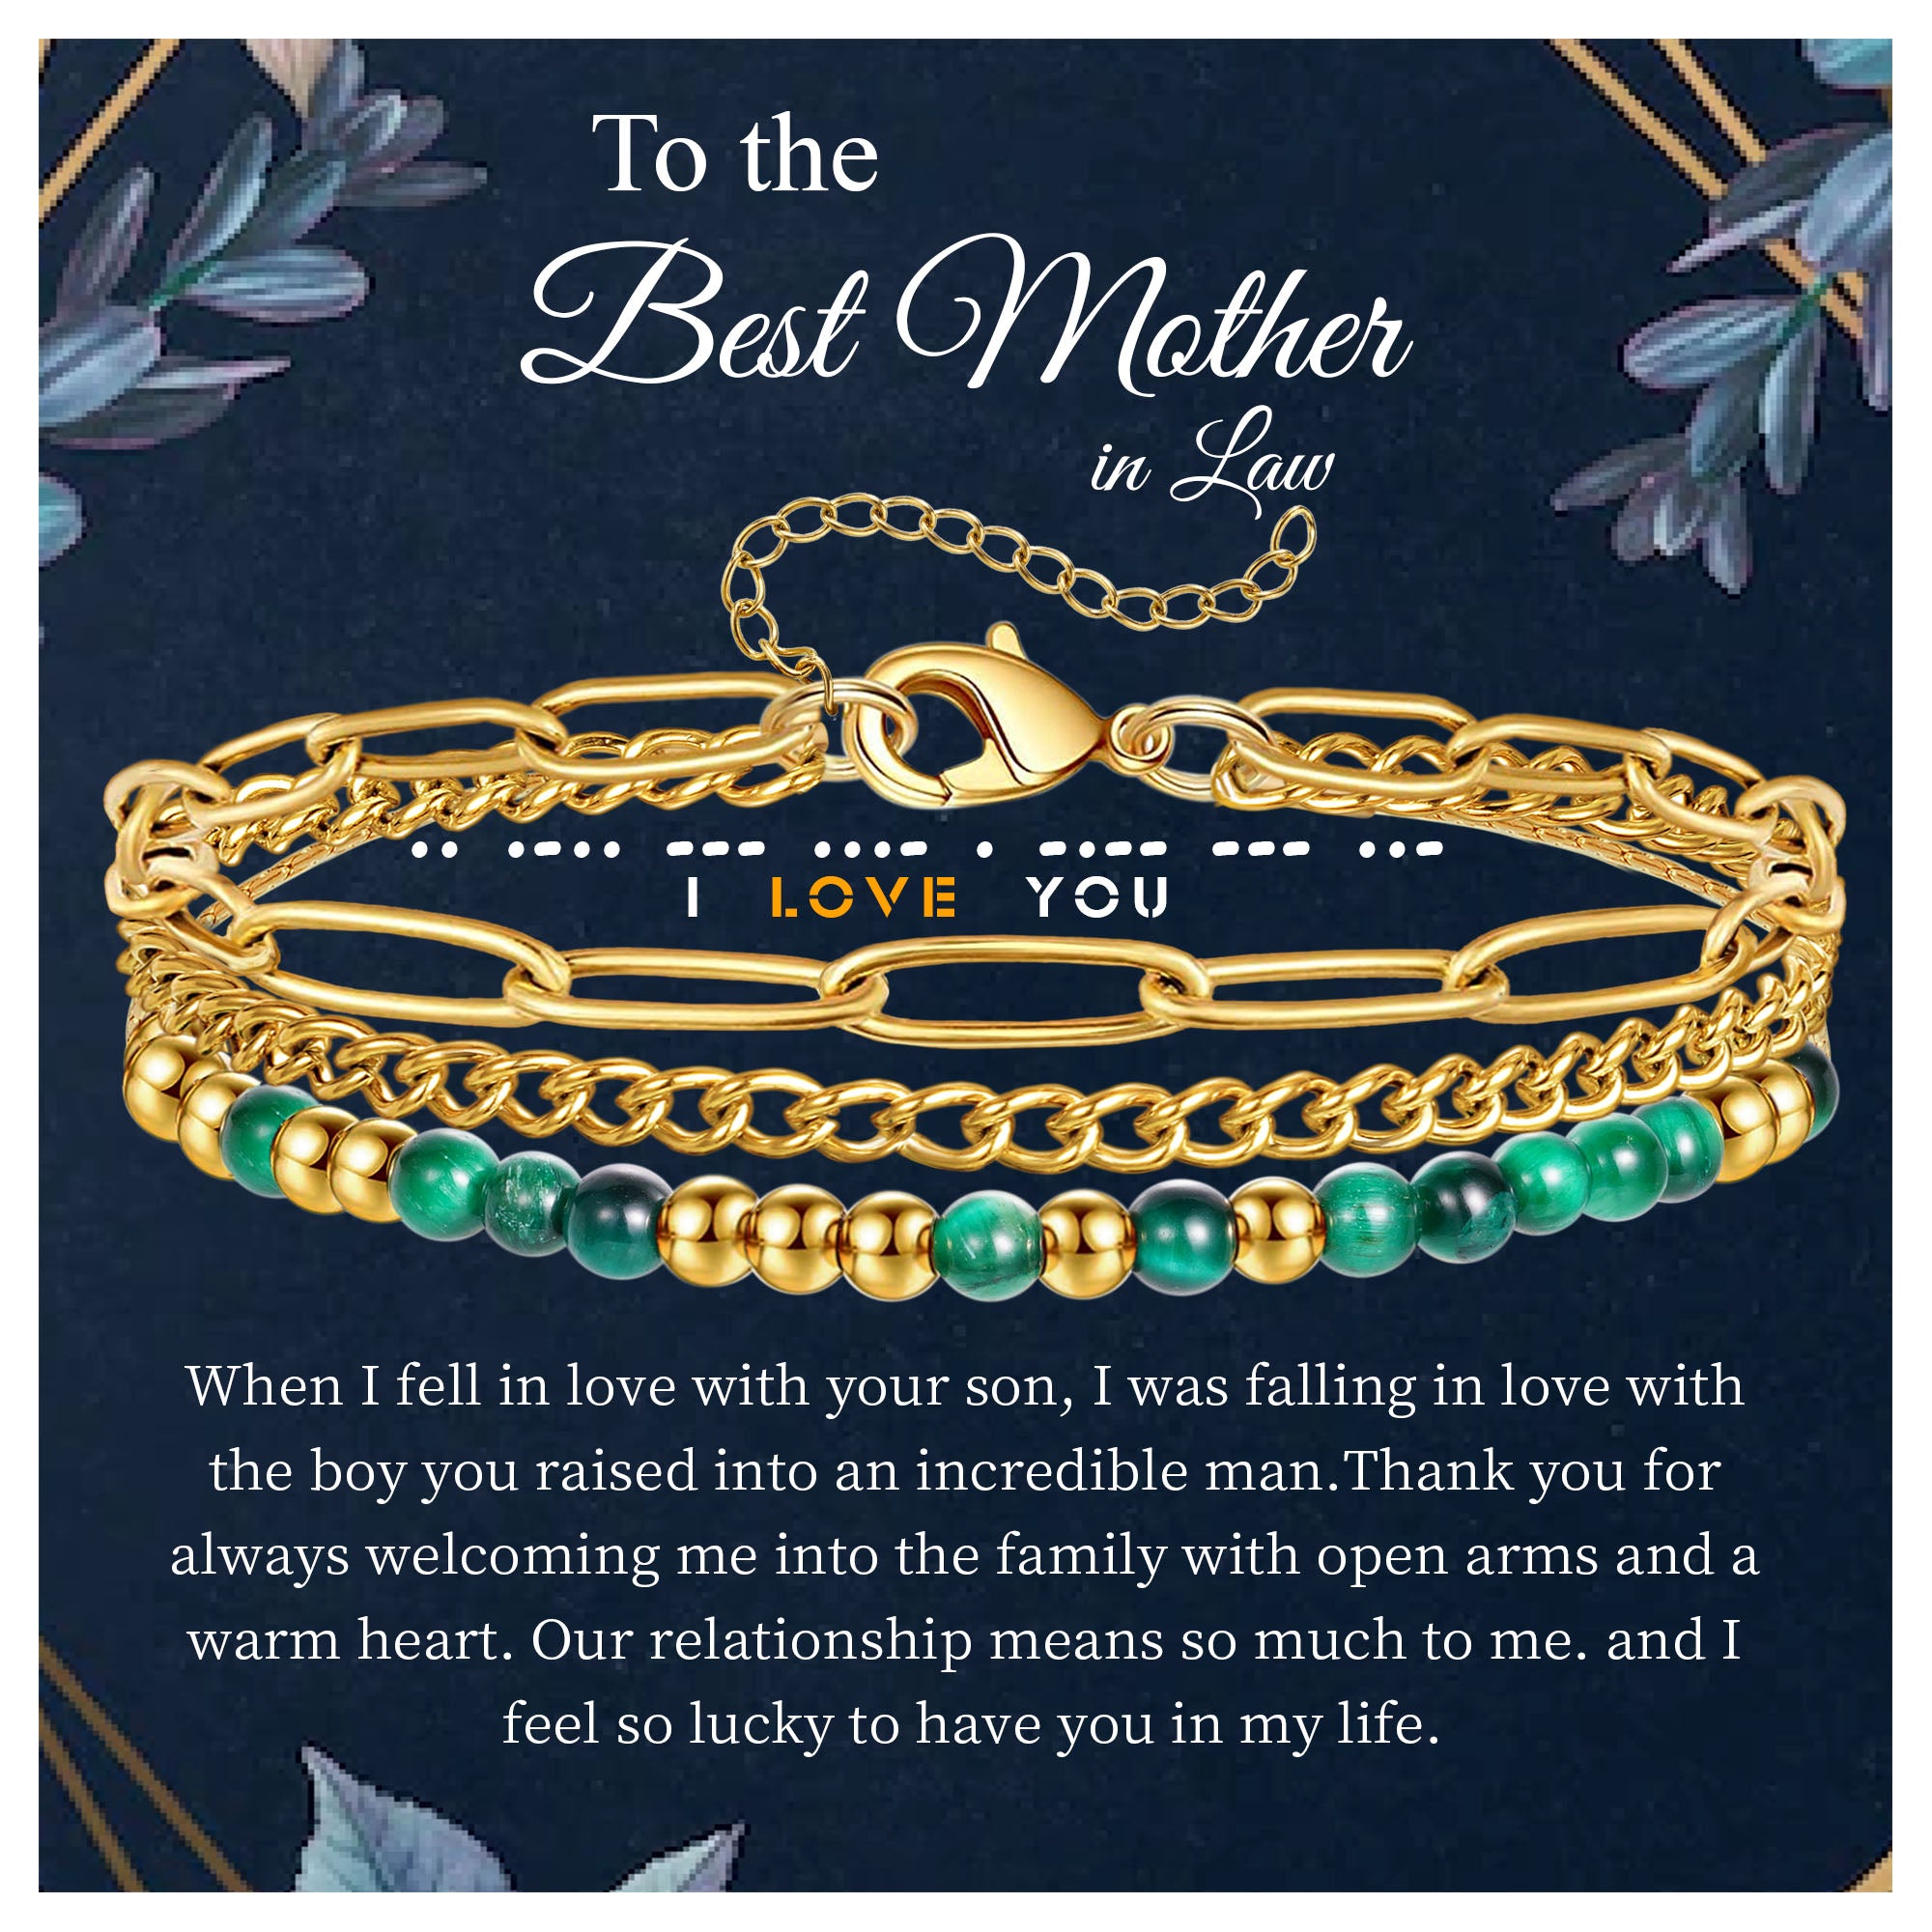 To The Best Mother in Law